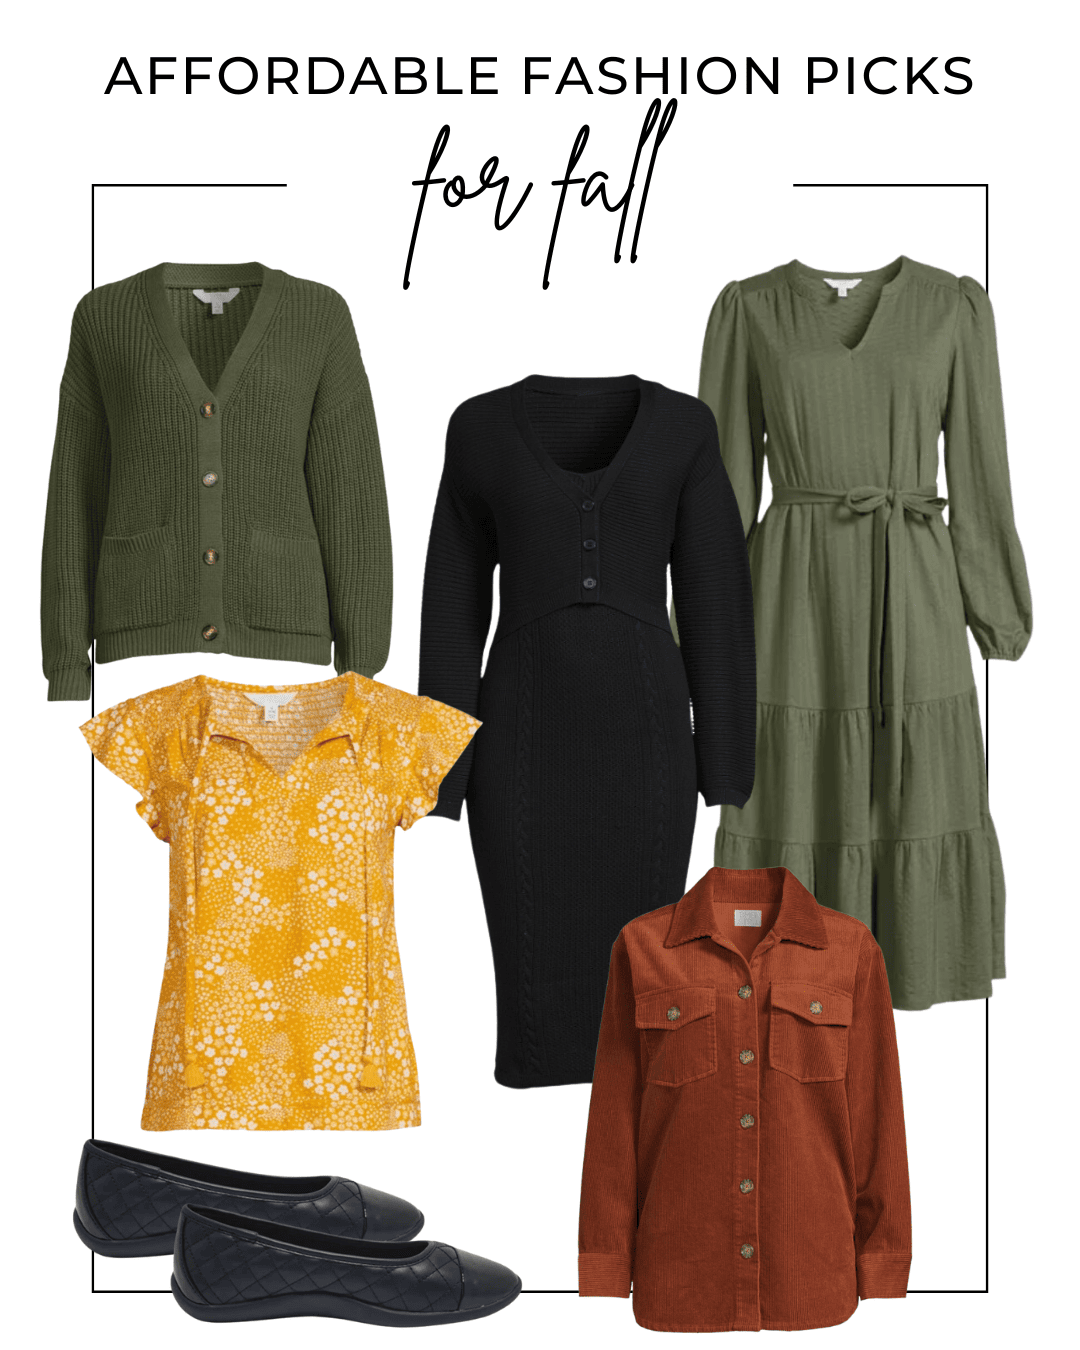 Collage image featuring green long dress, black midi dress, green cardigan, yellow top, rust colored jacket with a title that says "Affordable Fashion Picks For Fall"